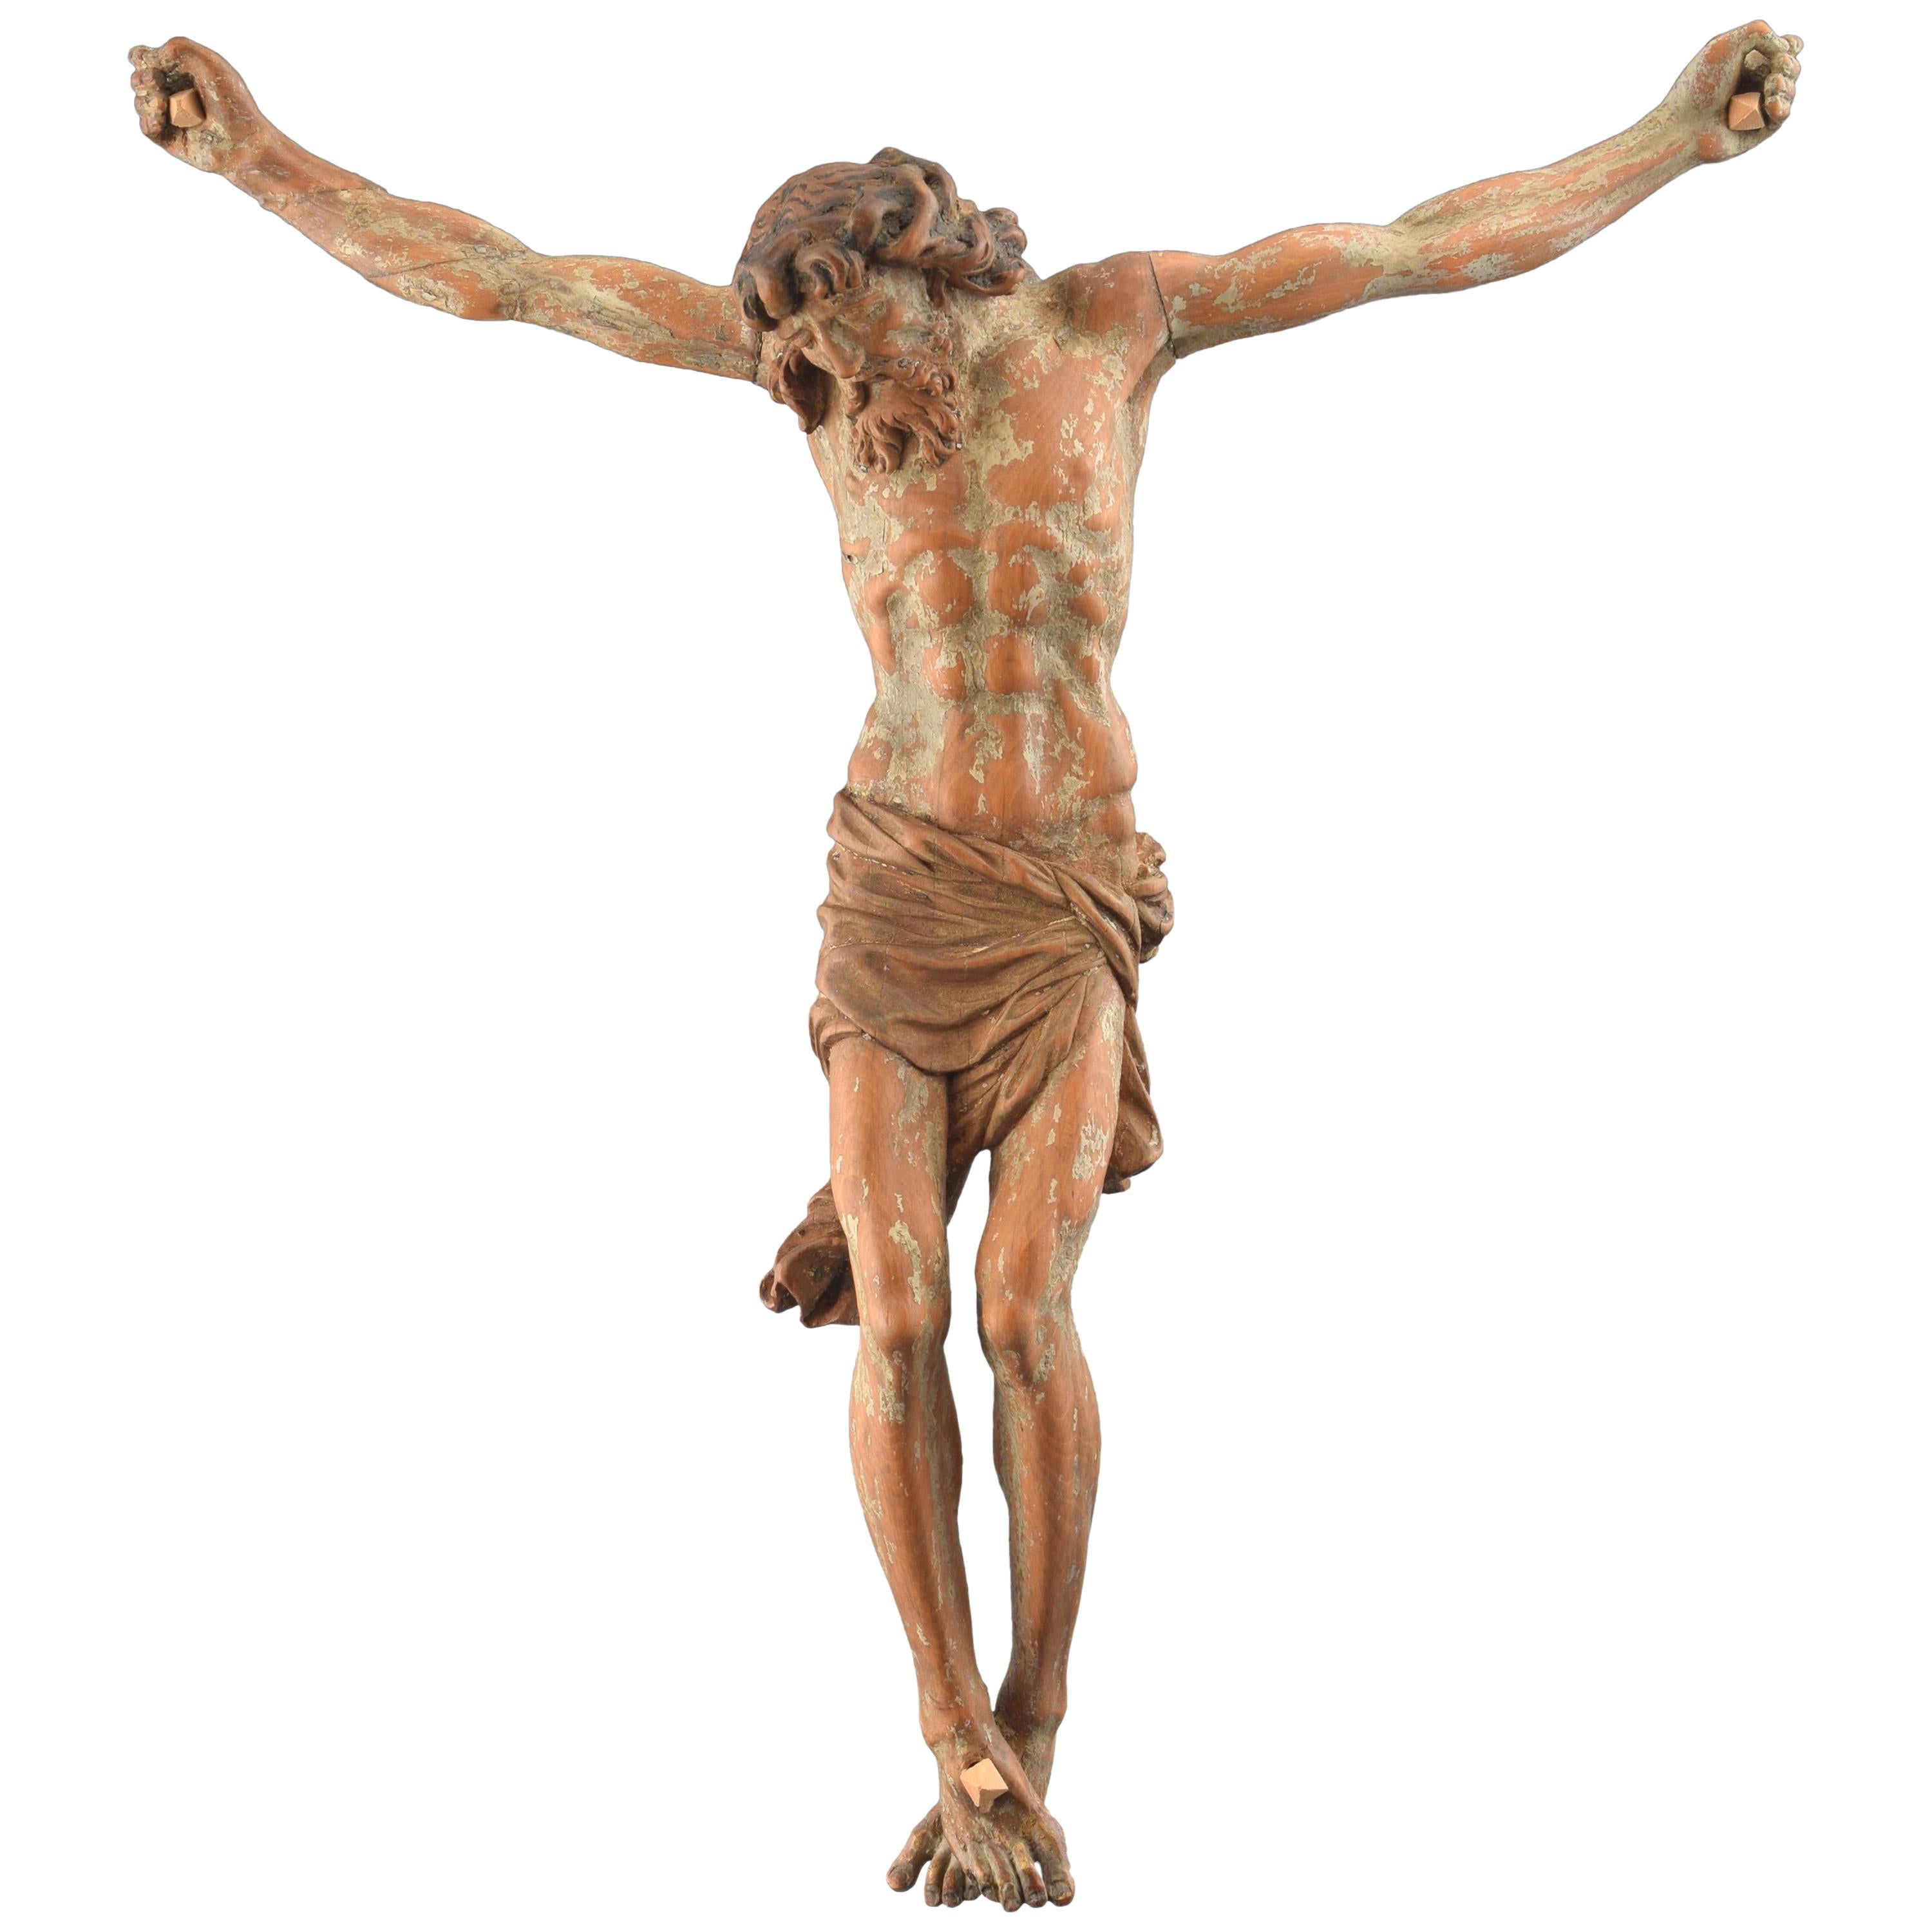 Crucified Christ, boxwood, Attributed to Juan de Juni or workshop, ca late 16thc